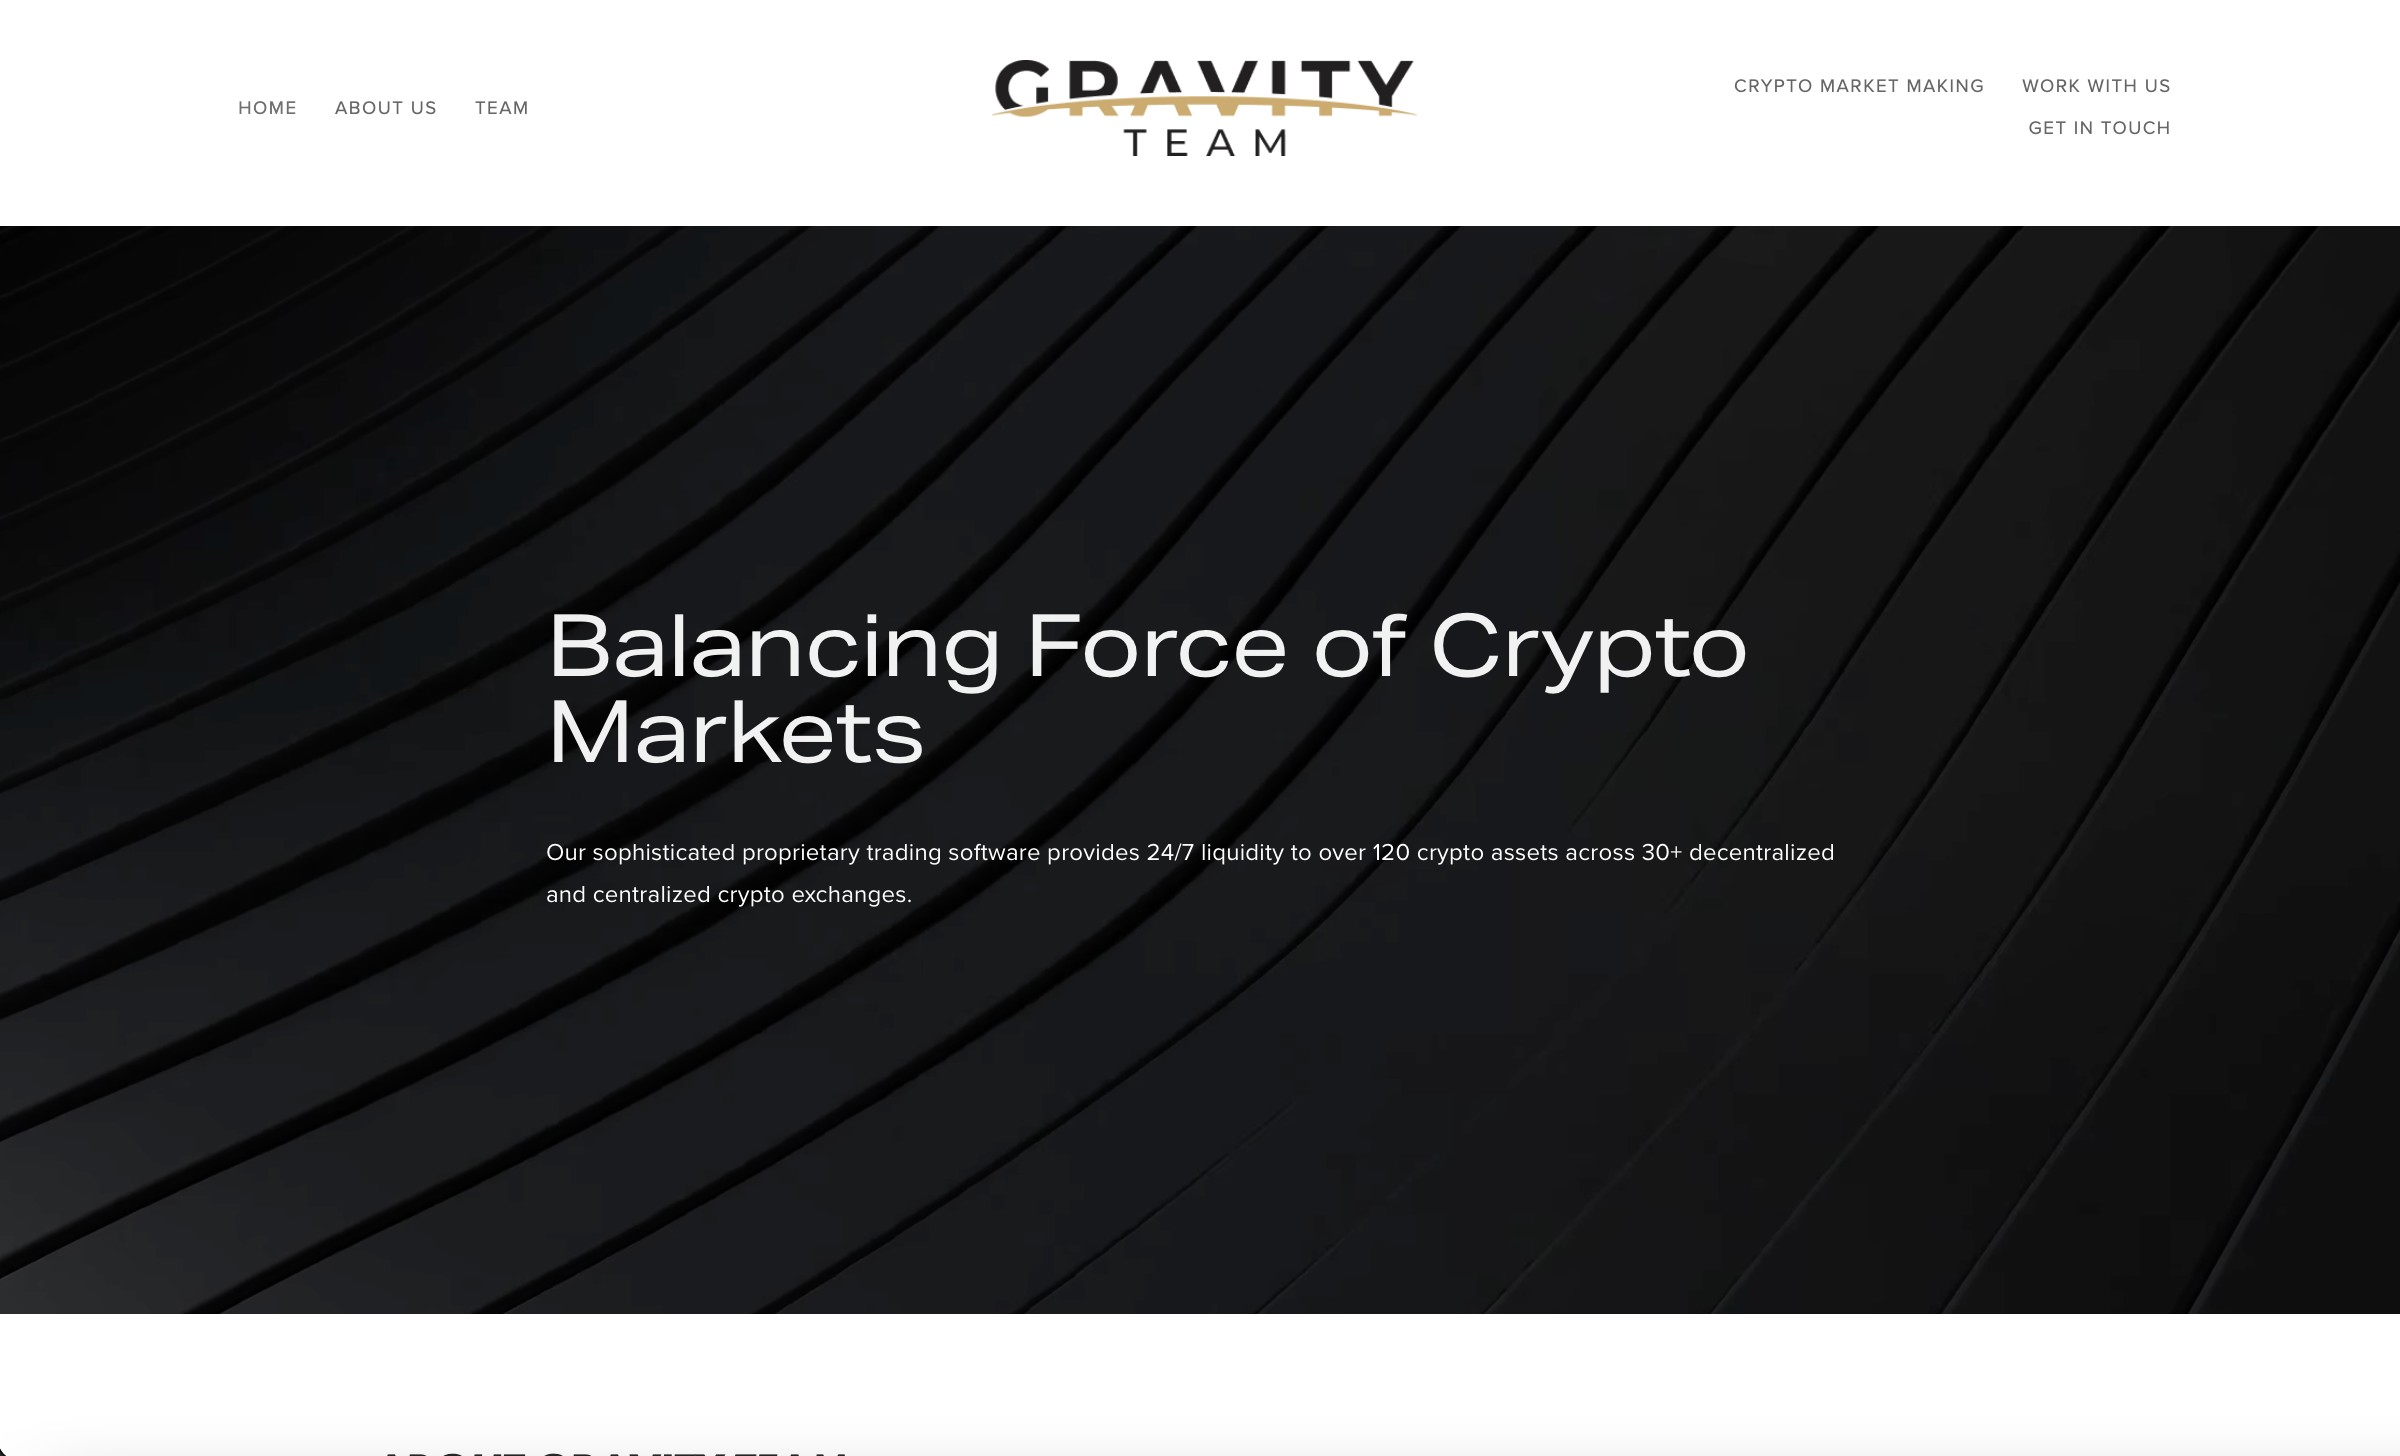 Gravity Team - Balancing force of crypto markets